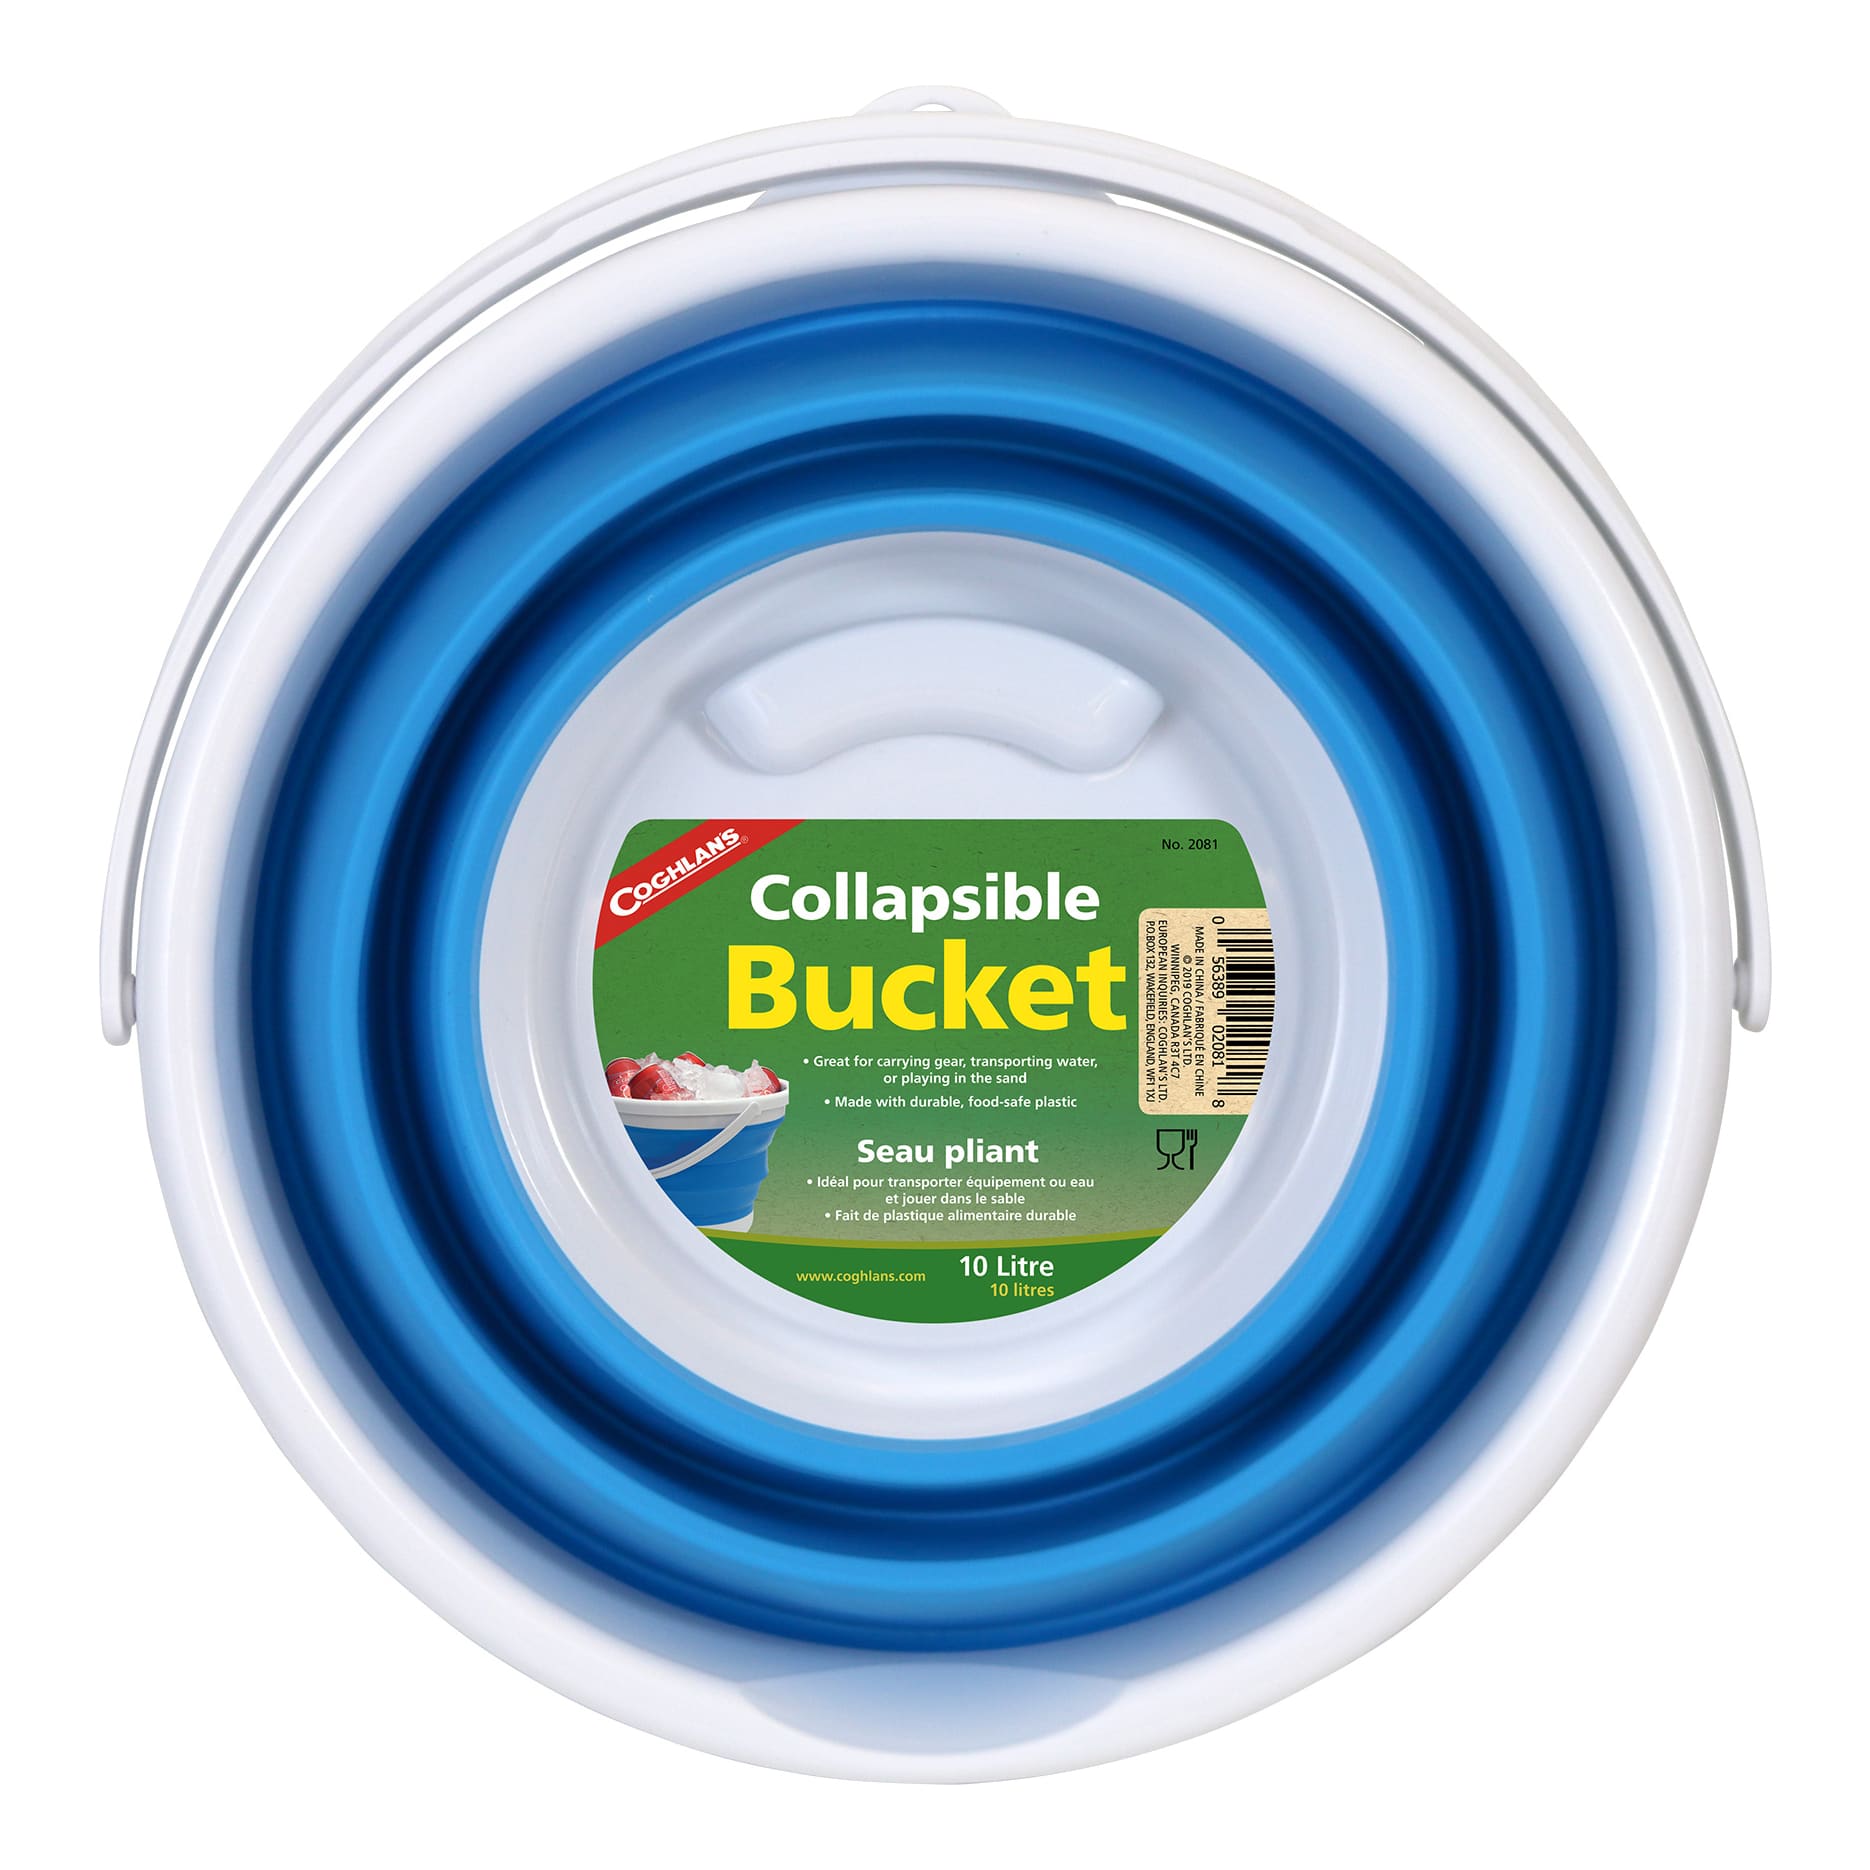 Coghlan's Collapsible Bucket - 10 Litre